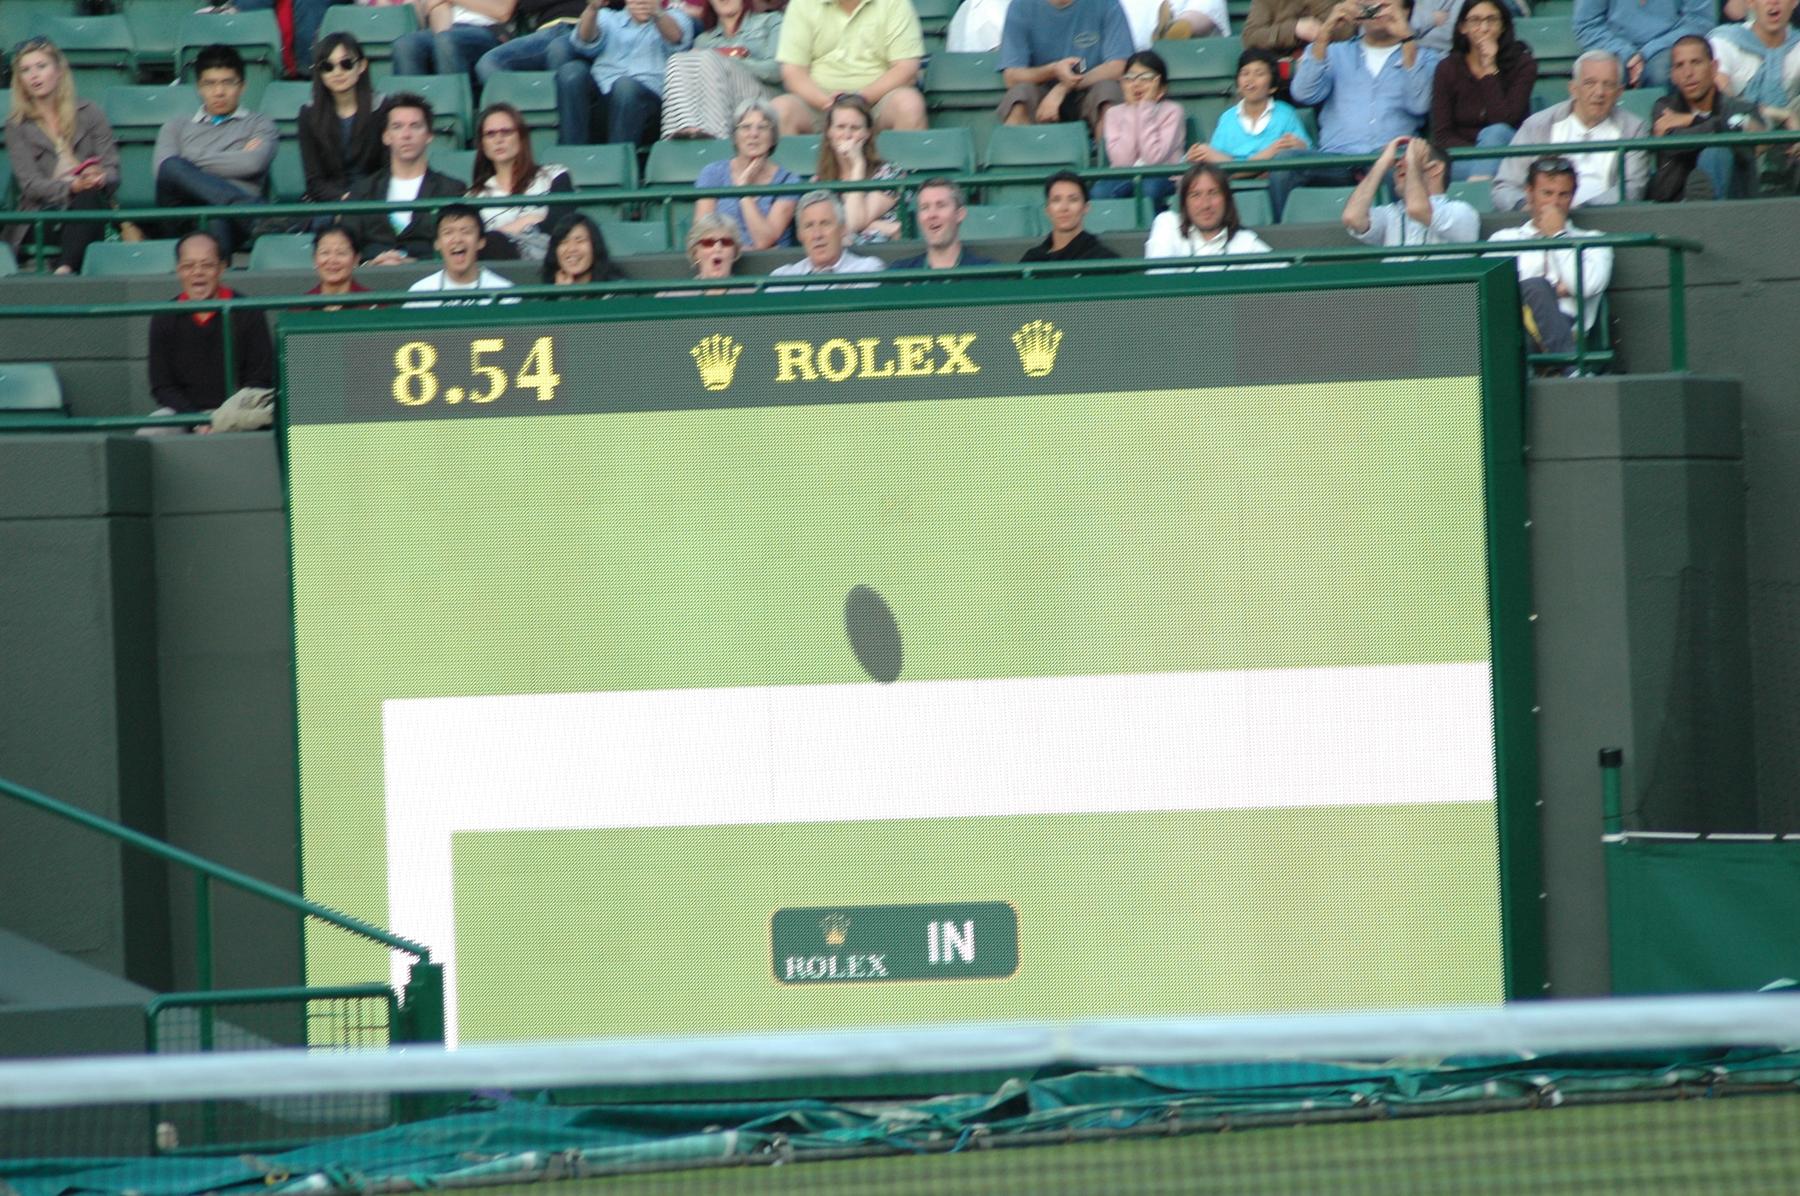 a man in a green shirt is playing tennis - File:The decision of In or Out with the help of Technolog